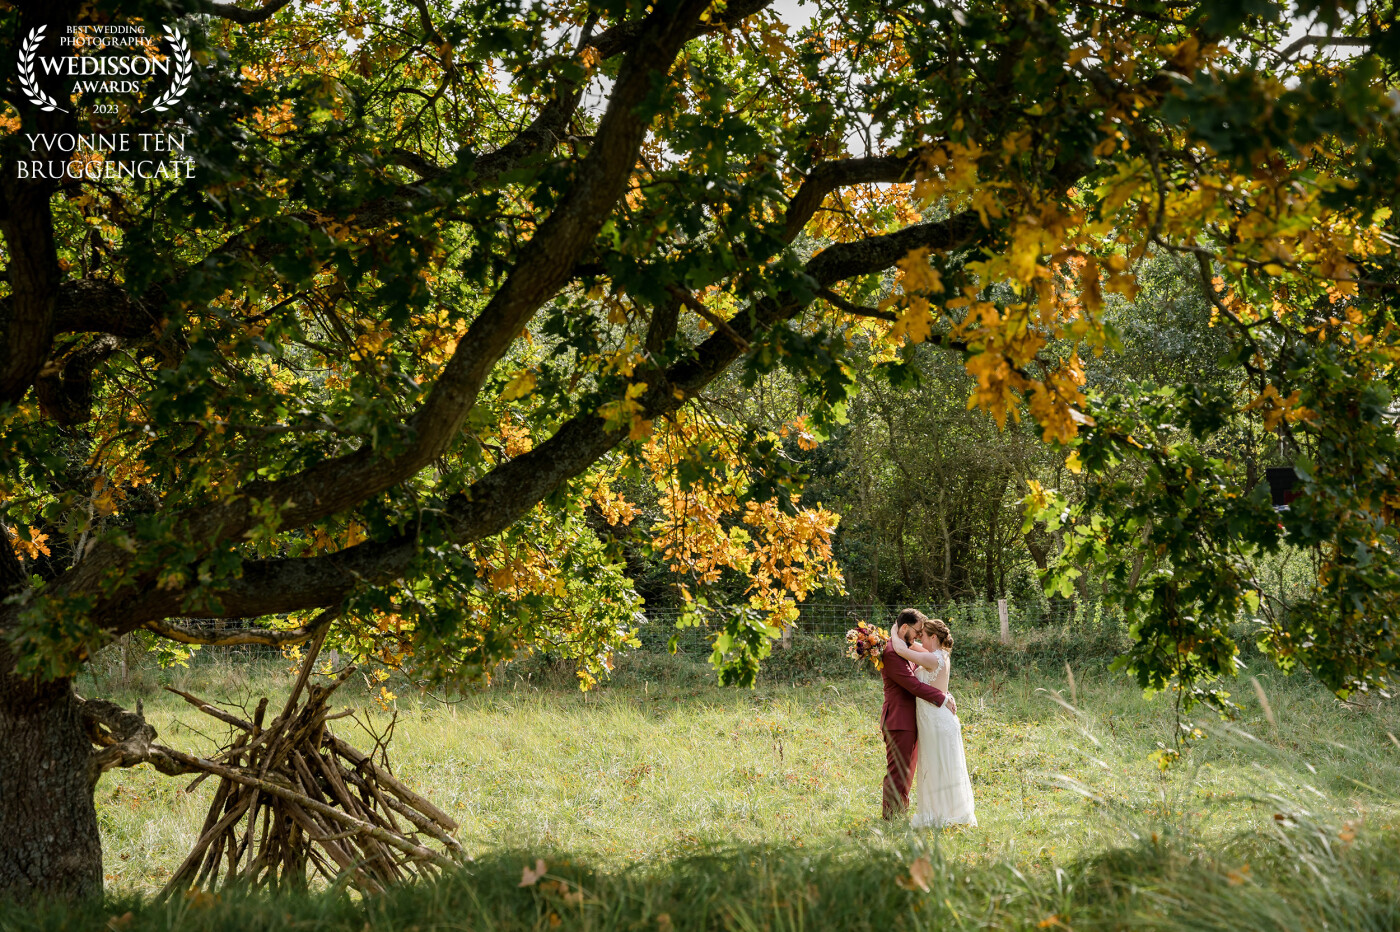 This beautiful Autumn wedding was everything a couple and photographer could ever dream of. All these beautiful colors, the nice weather, the lovely and handsome couple. A golden dag!